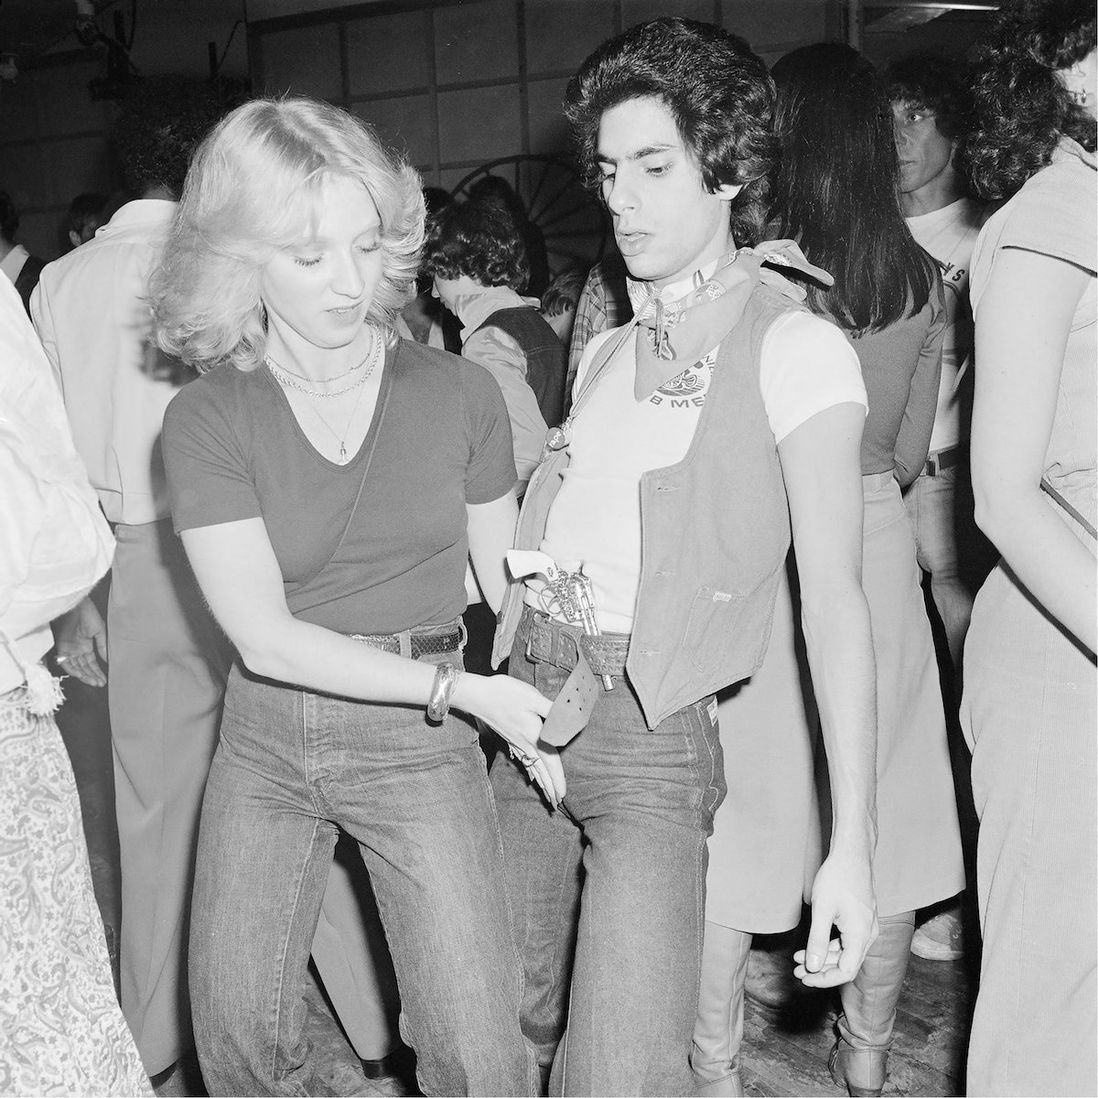 Dancing Hand-to-Crotch at a Hurrah Wild Wild West Party, New York, NY, March 1978<br>